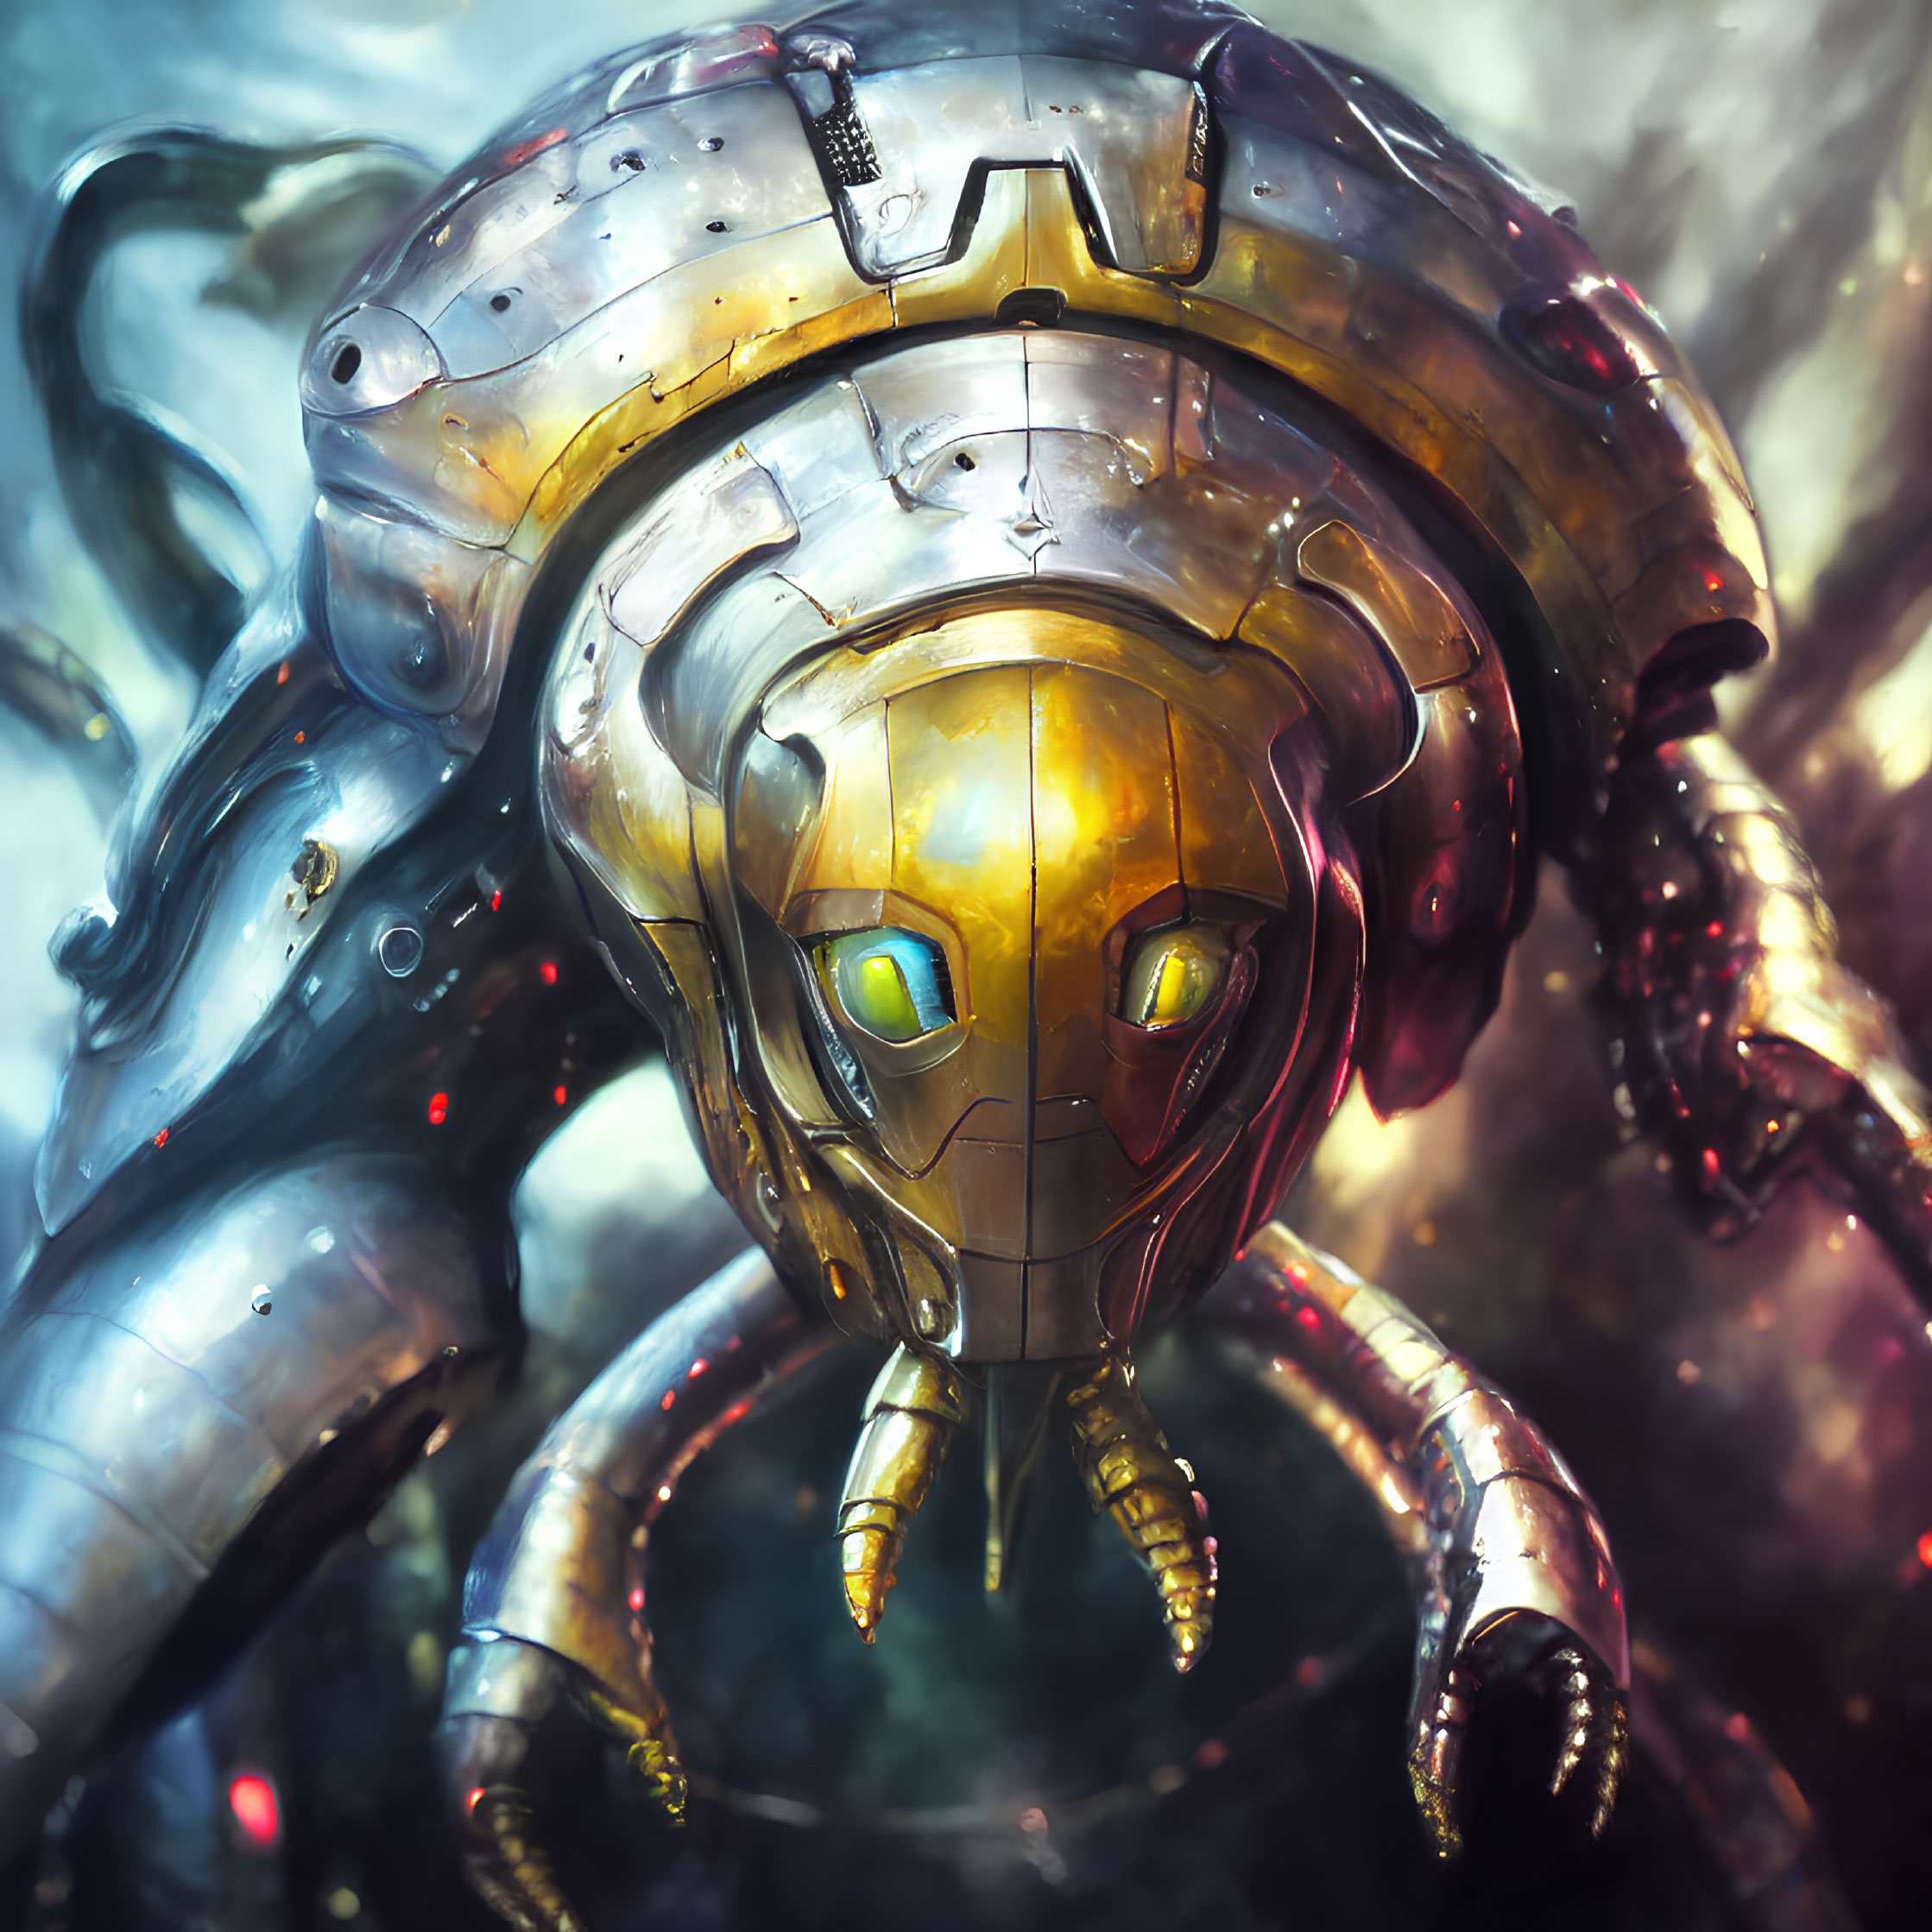 Detailed Illustration: Robot with Golden Faceplate & Silver Armor, Glowing Red Eyes in Misty